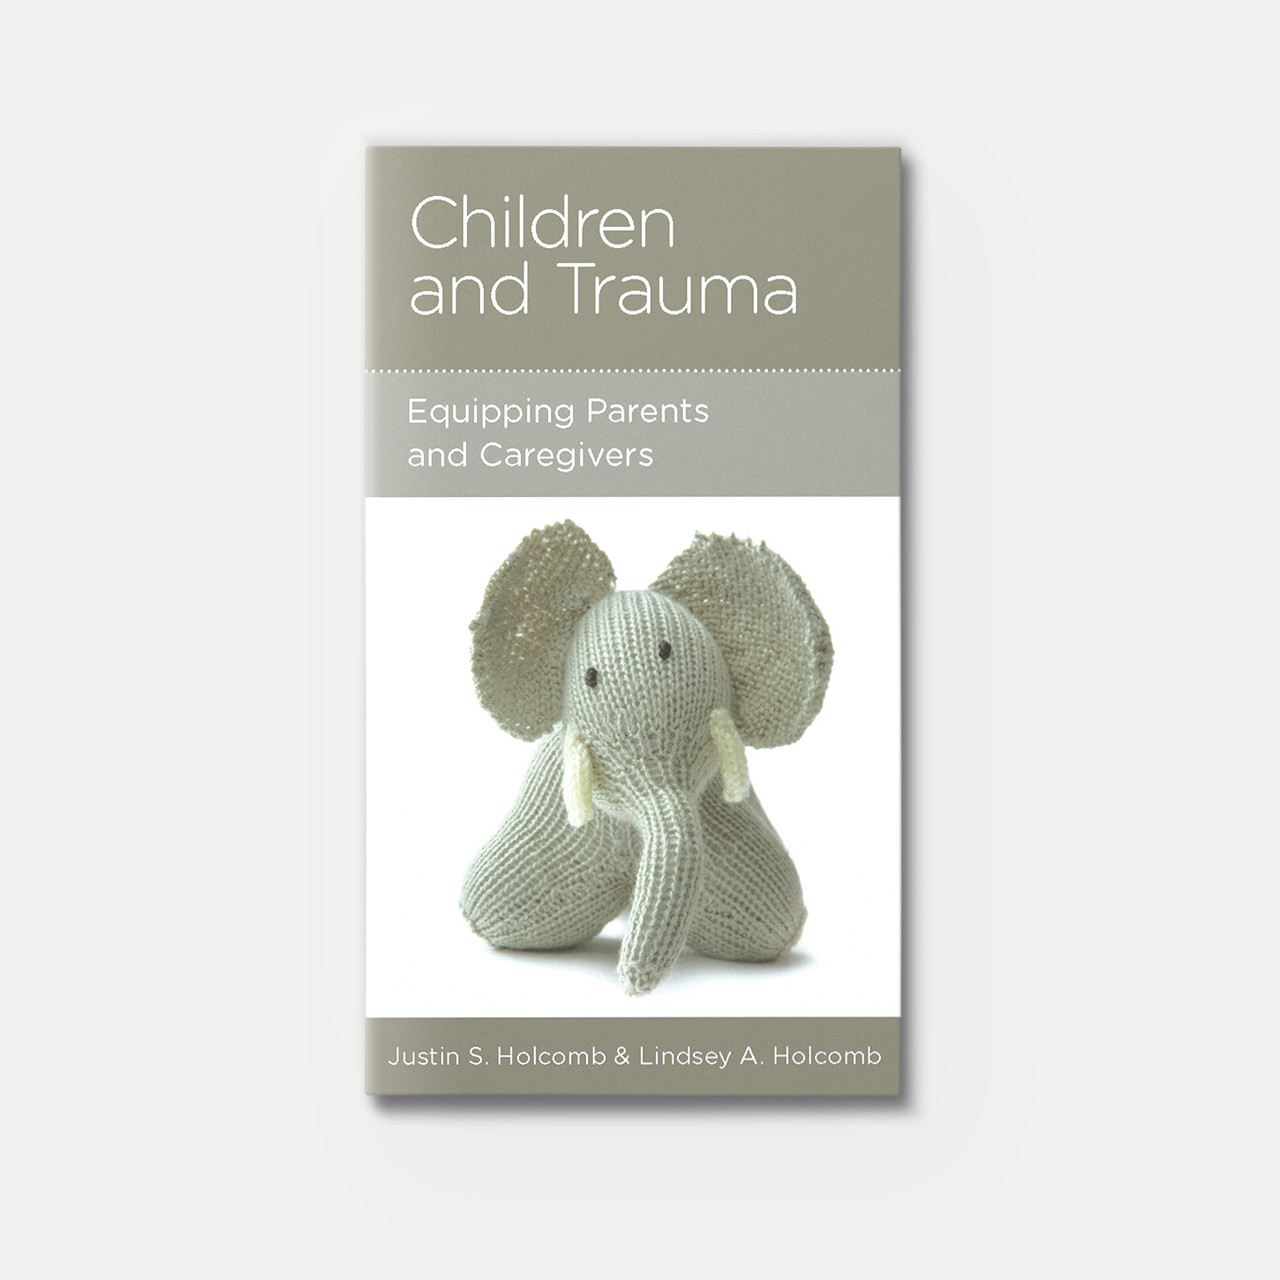 Buy Children and Trauma, Equipping Parents and Caregivers Minibooks